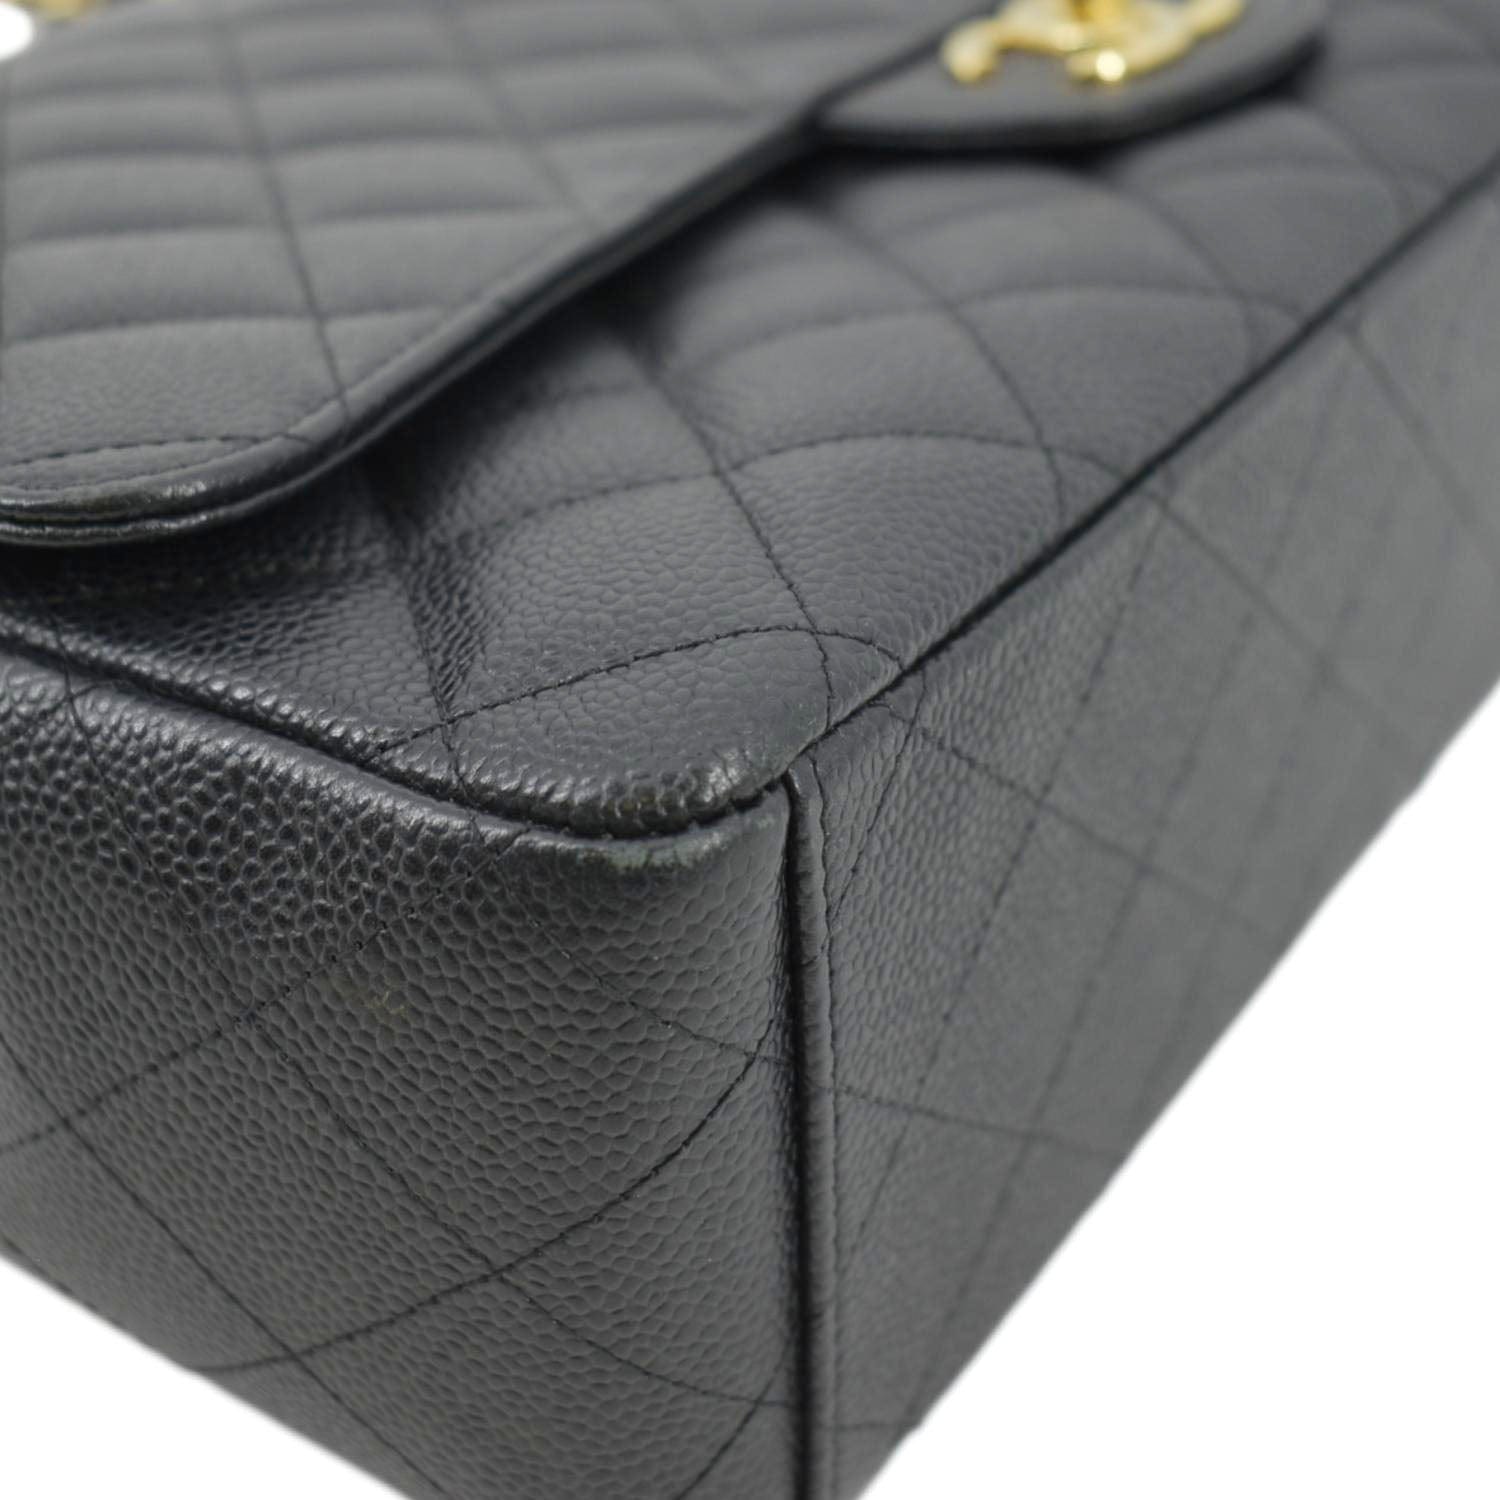 Buy CHANEL Black Caviar Quilted Jumbo Classic Flap LGHW